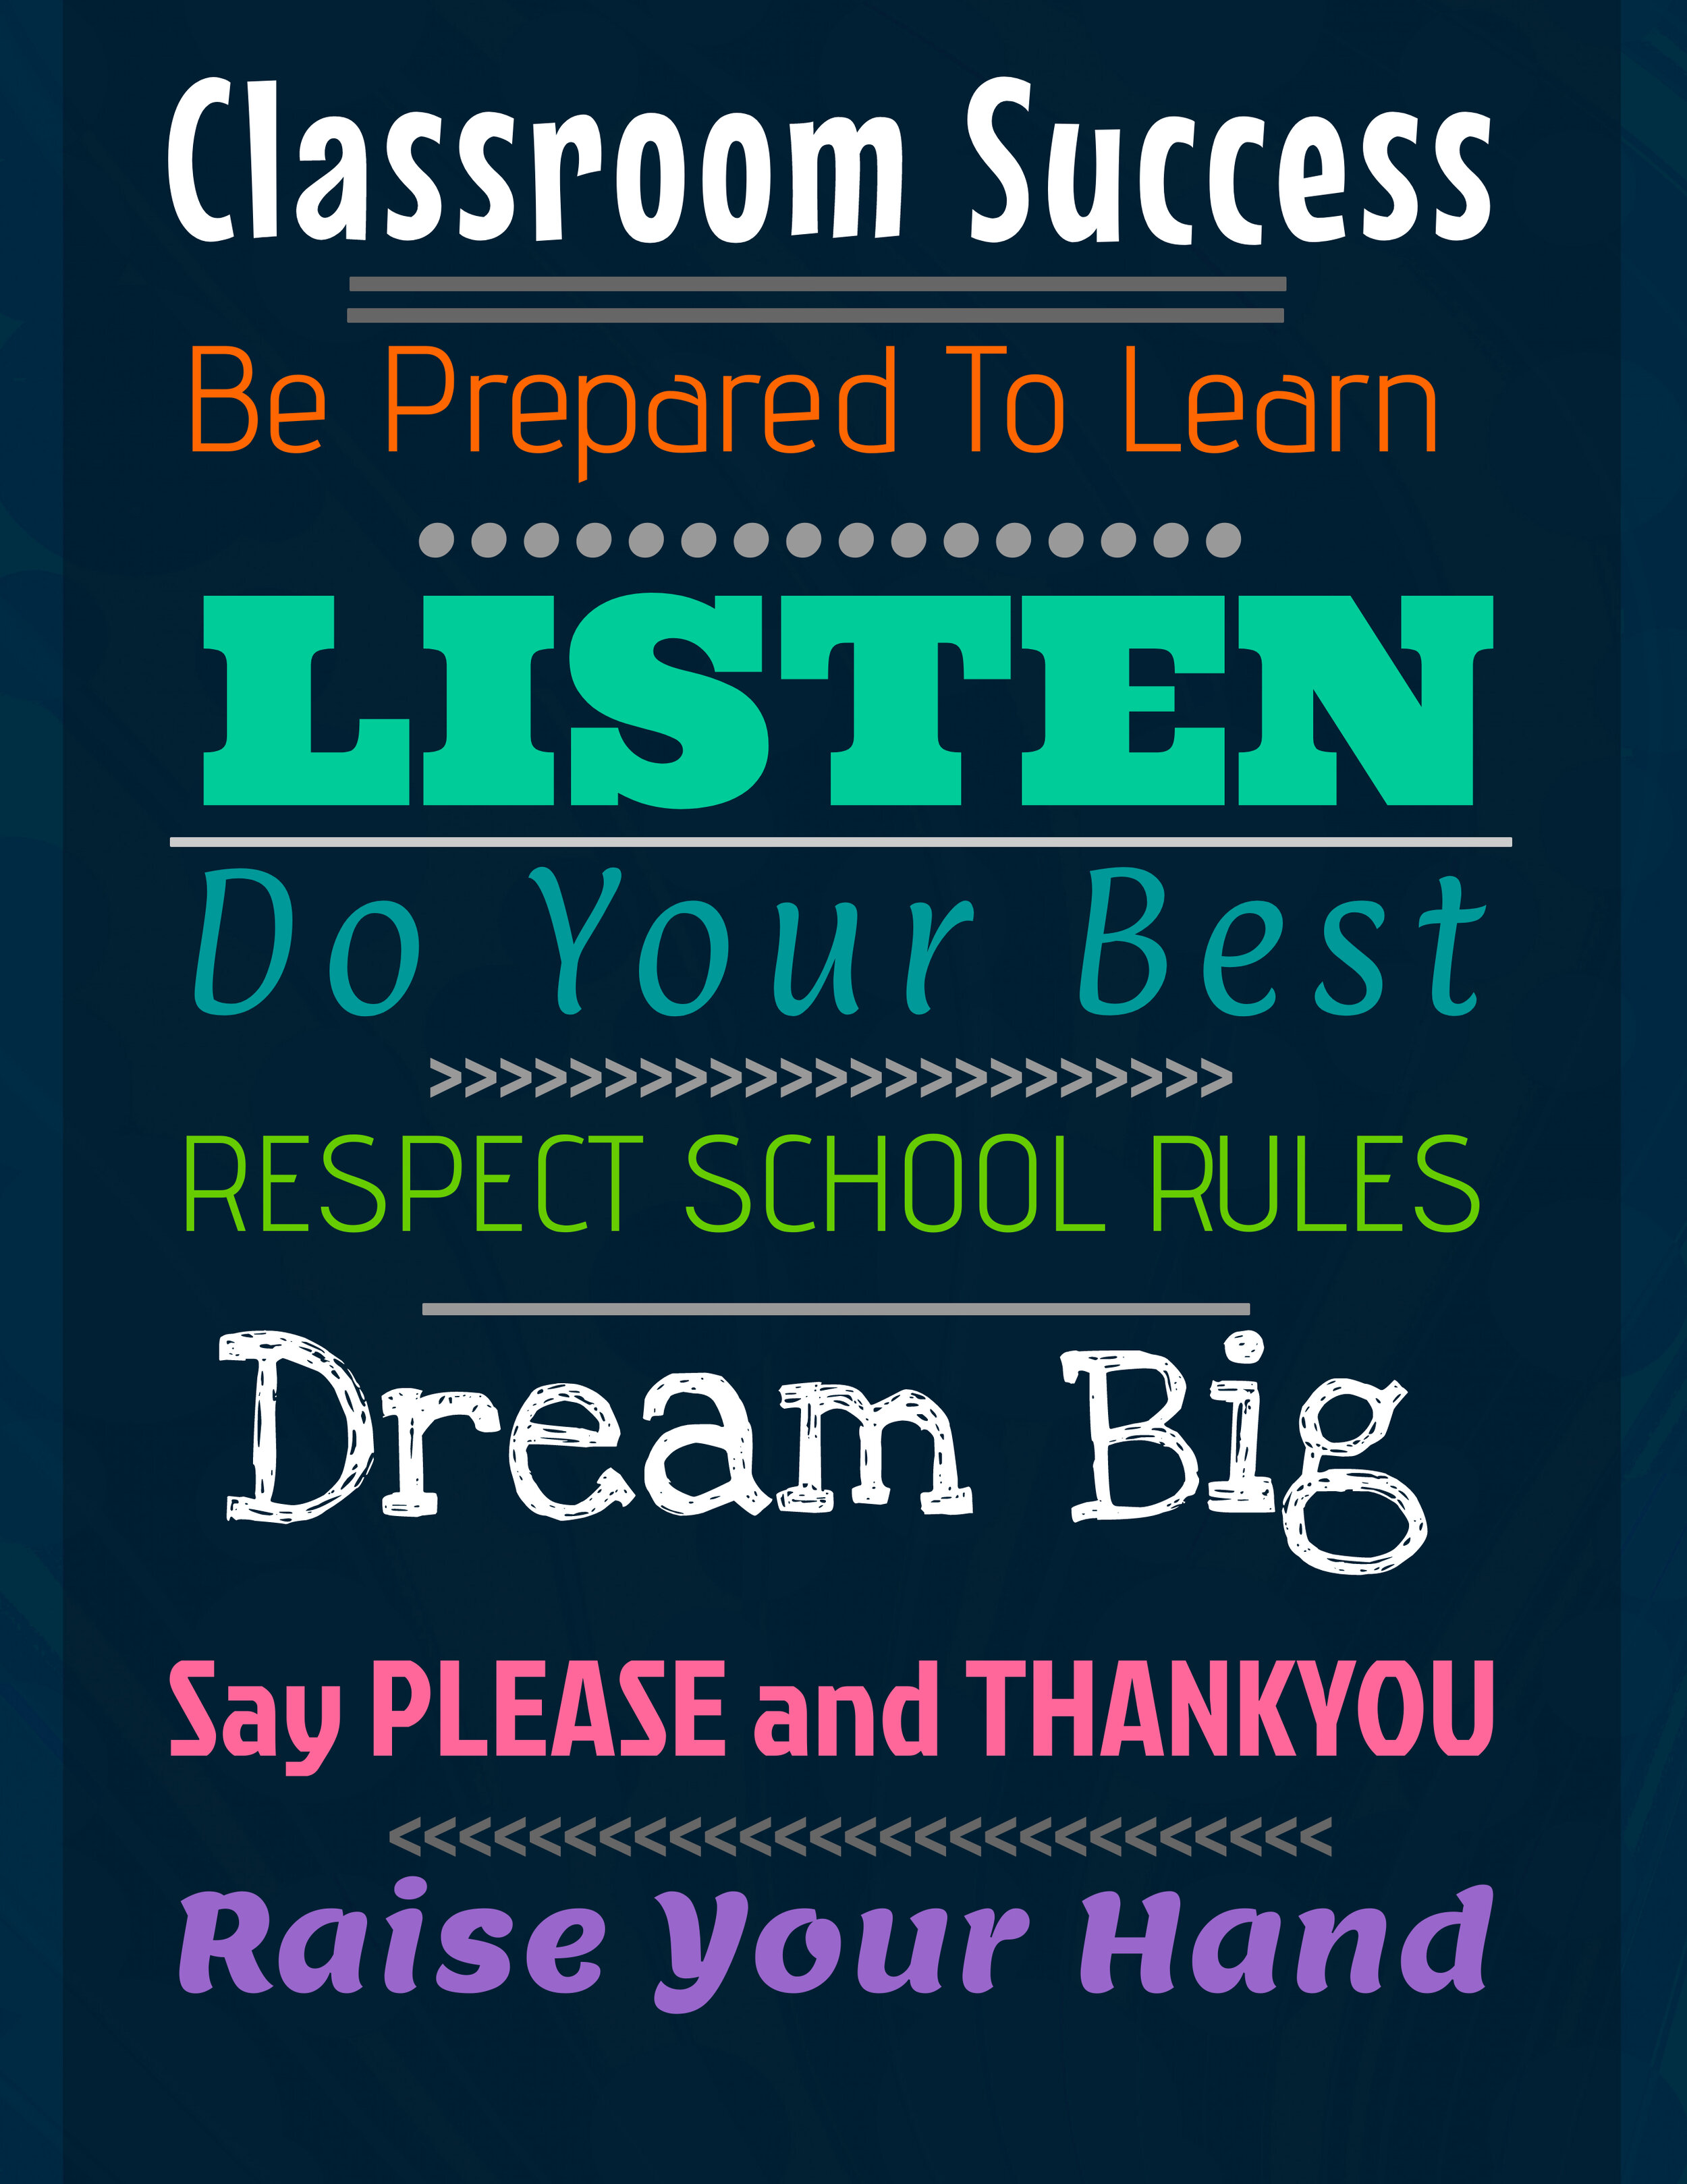 Classroom rules flyer